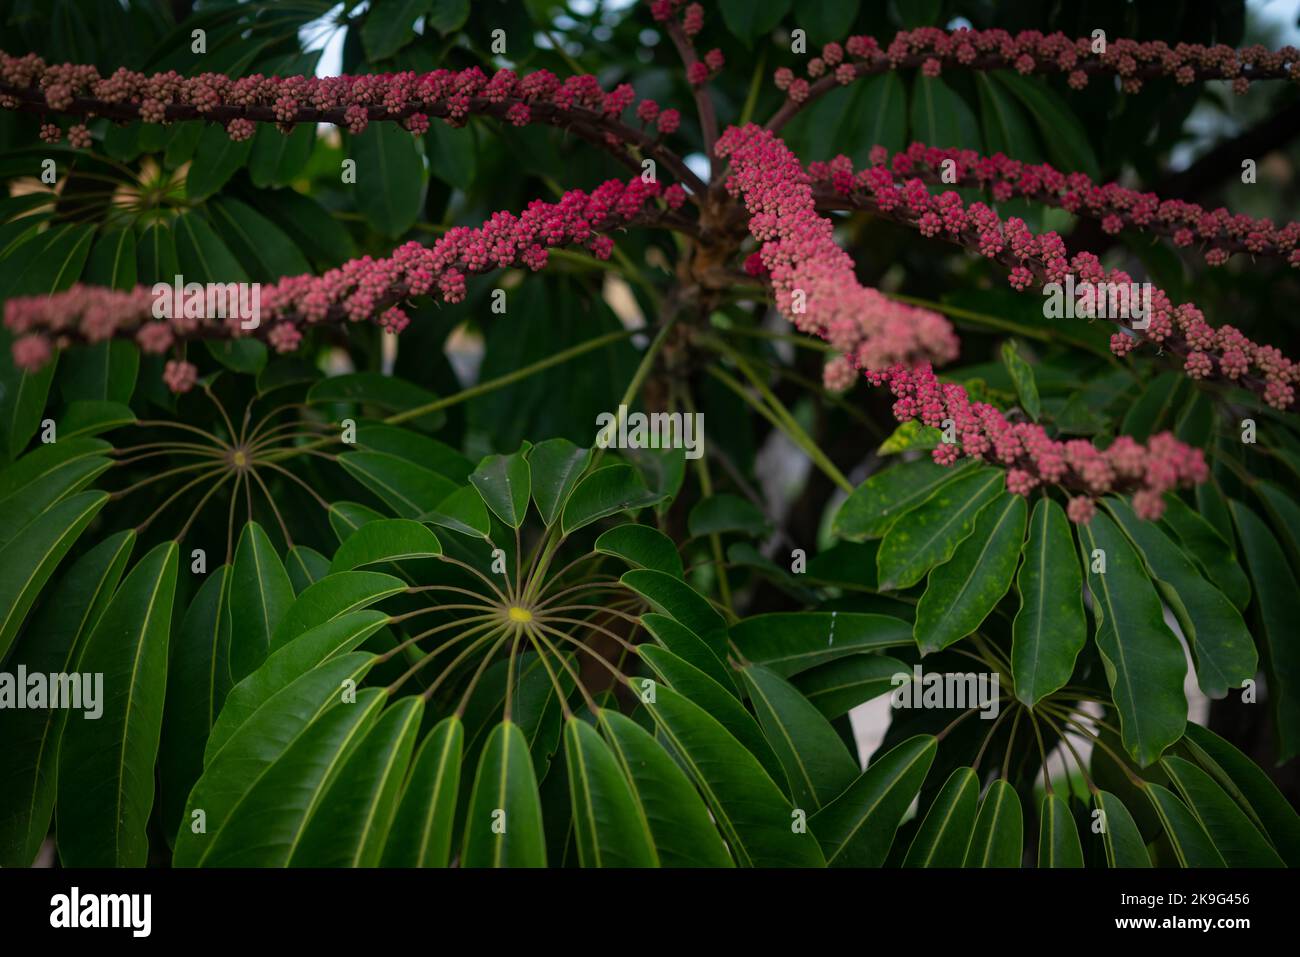 Mostly blurred red fruits and leaves of schefflera actinofphylla umbrella tree Stock Photo